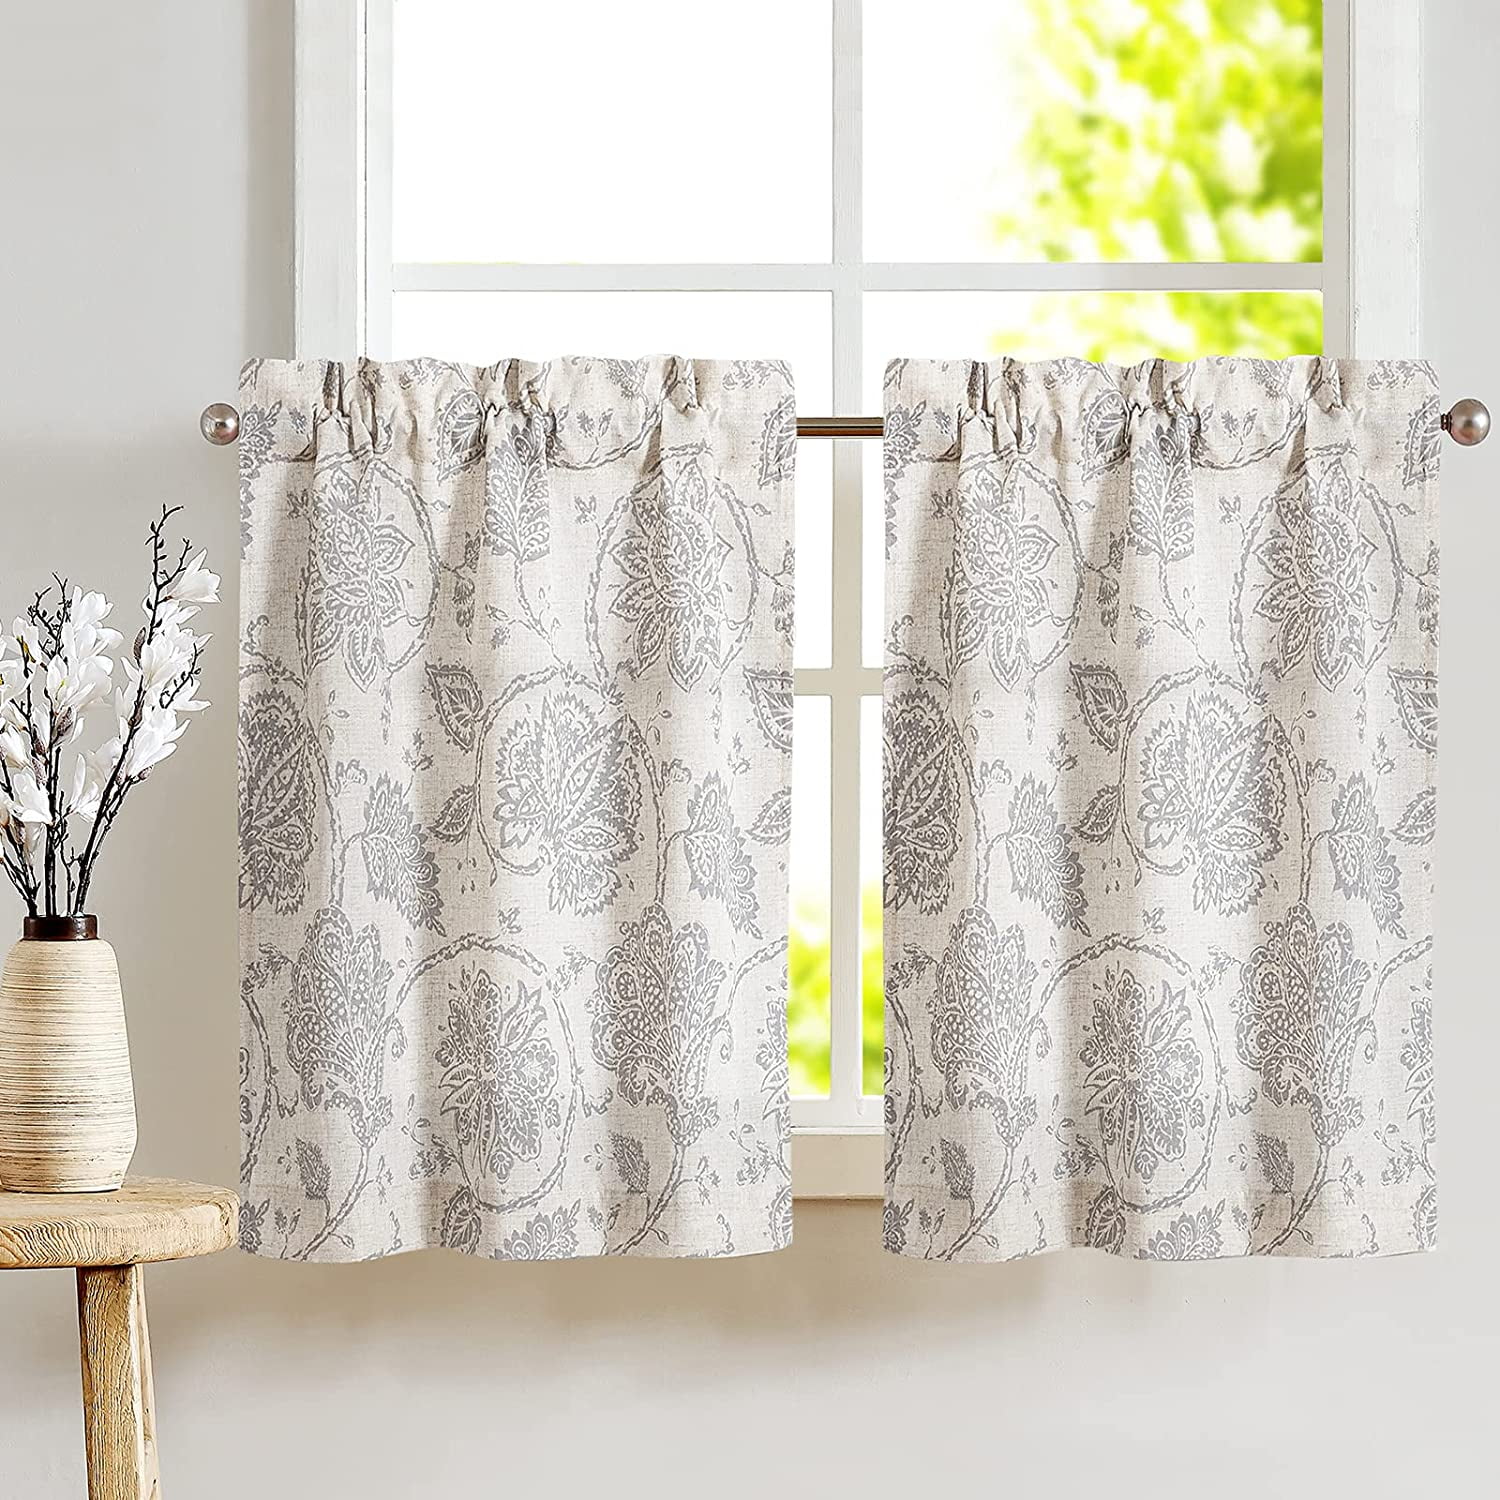 CURTAINKING Kitchen Curtains Floral Printed Short Window Curtains Linen  Tiers Grey Farmhouse Cafe Curtains 36 inch Length Rod Pocket 2 Panels Grey  on